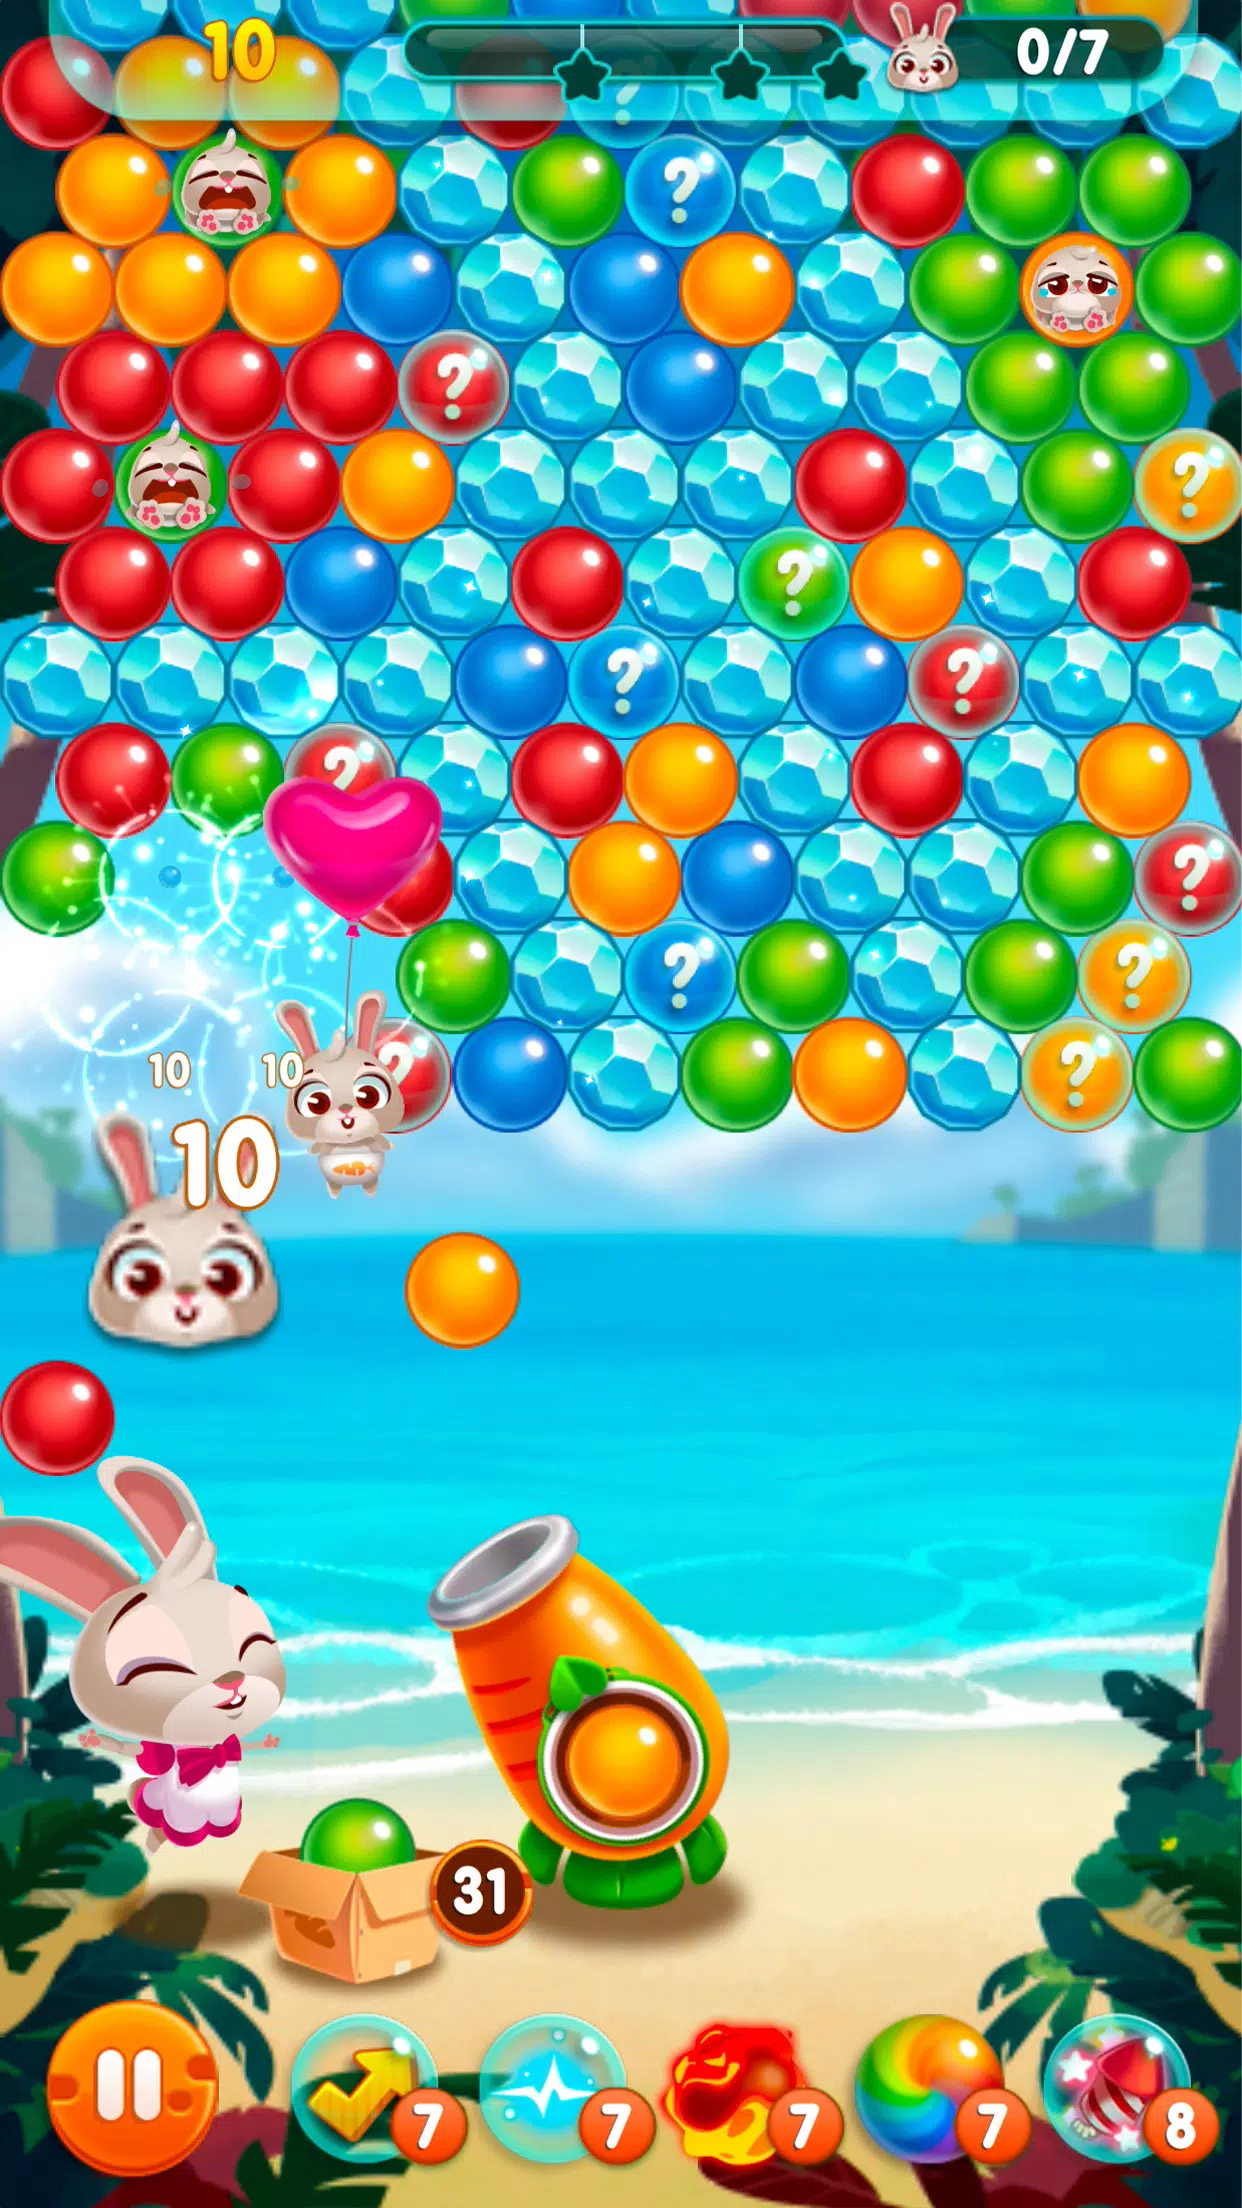 Bunny Pop APK for Android Download